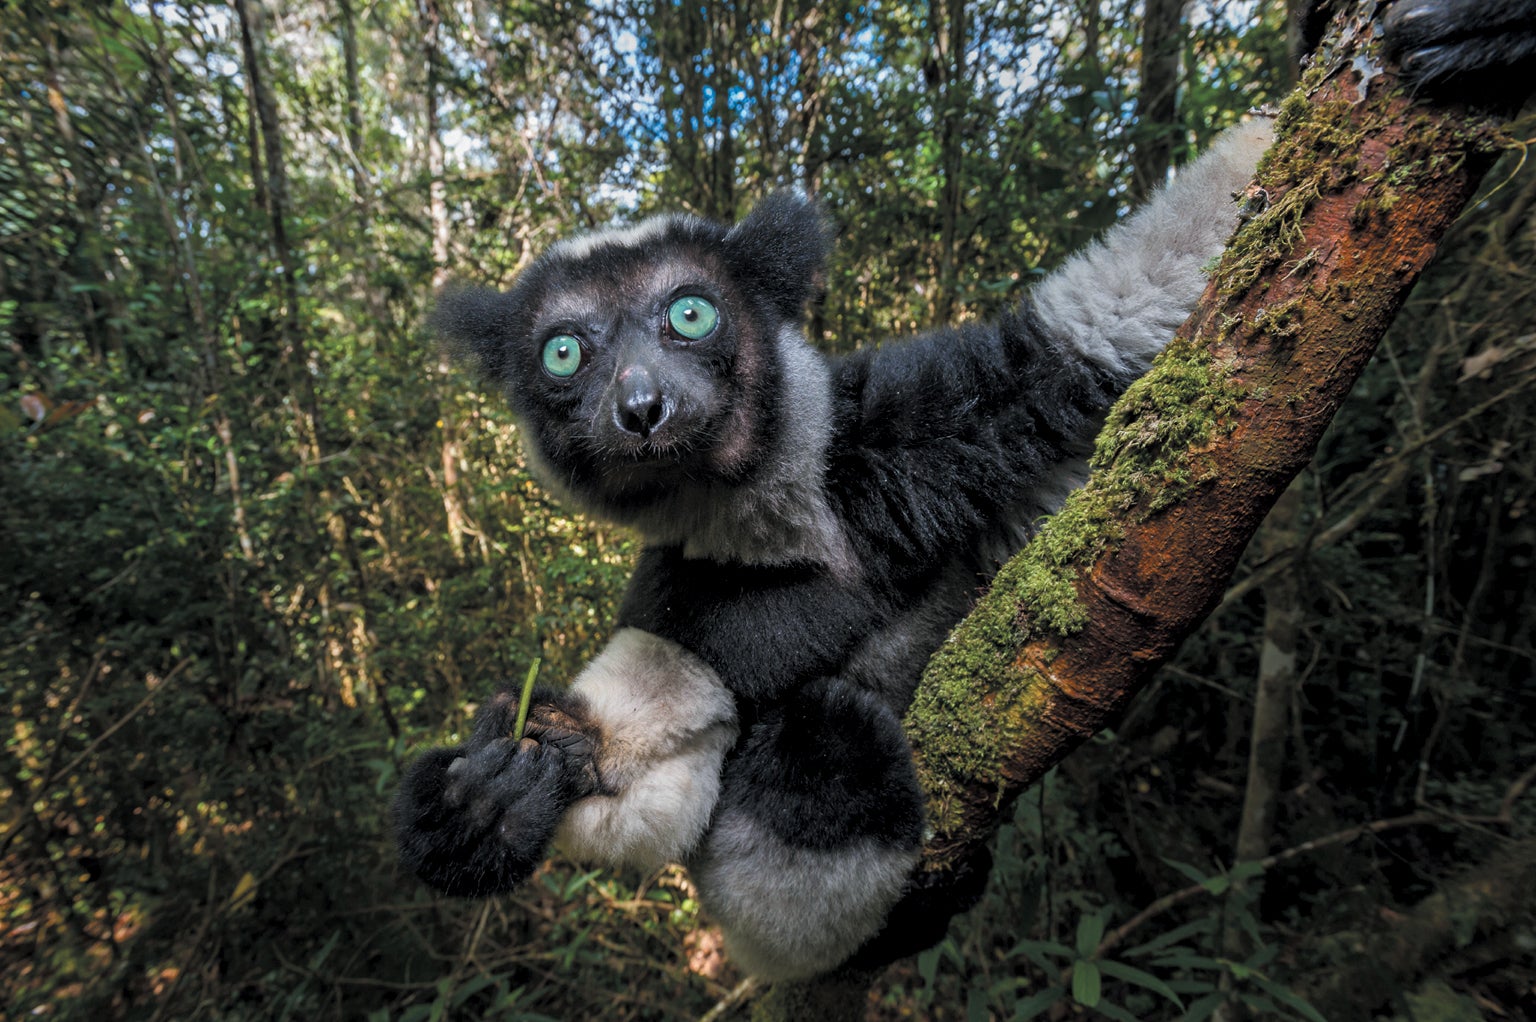 Giant Lemurs Are the First Mammals (besides Us) Found to Use Musical Rhythm  - Scientific American